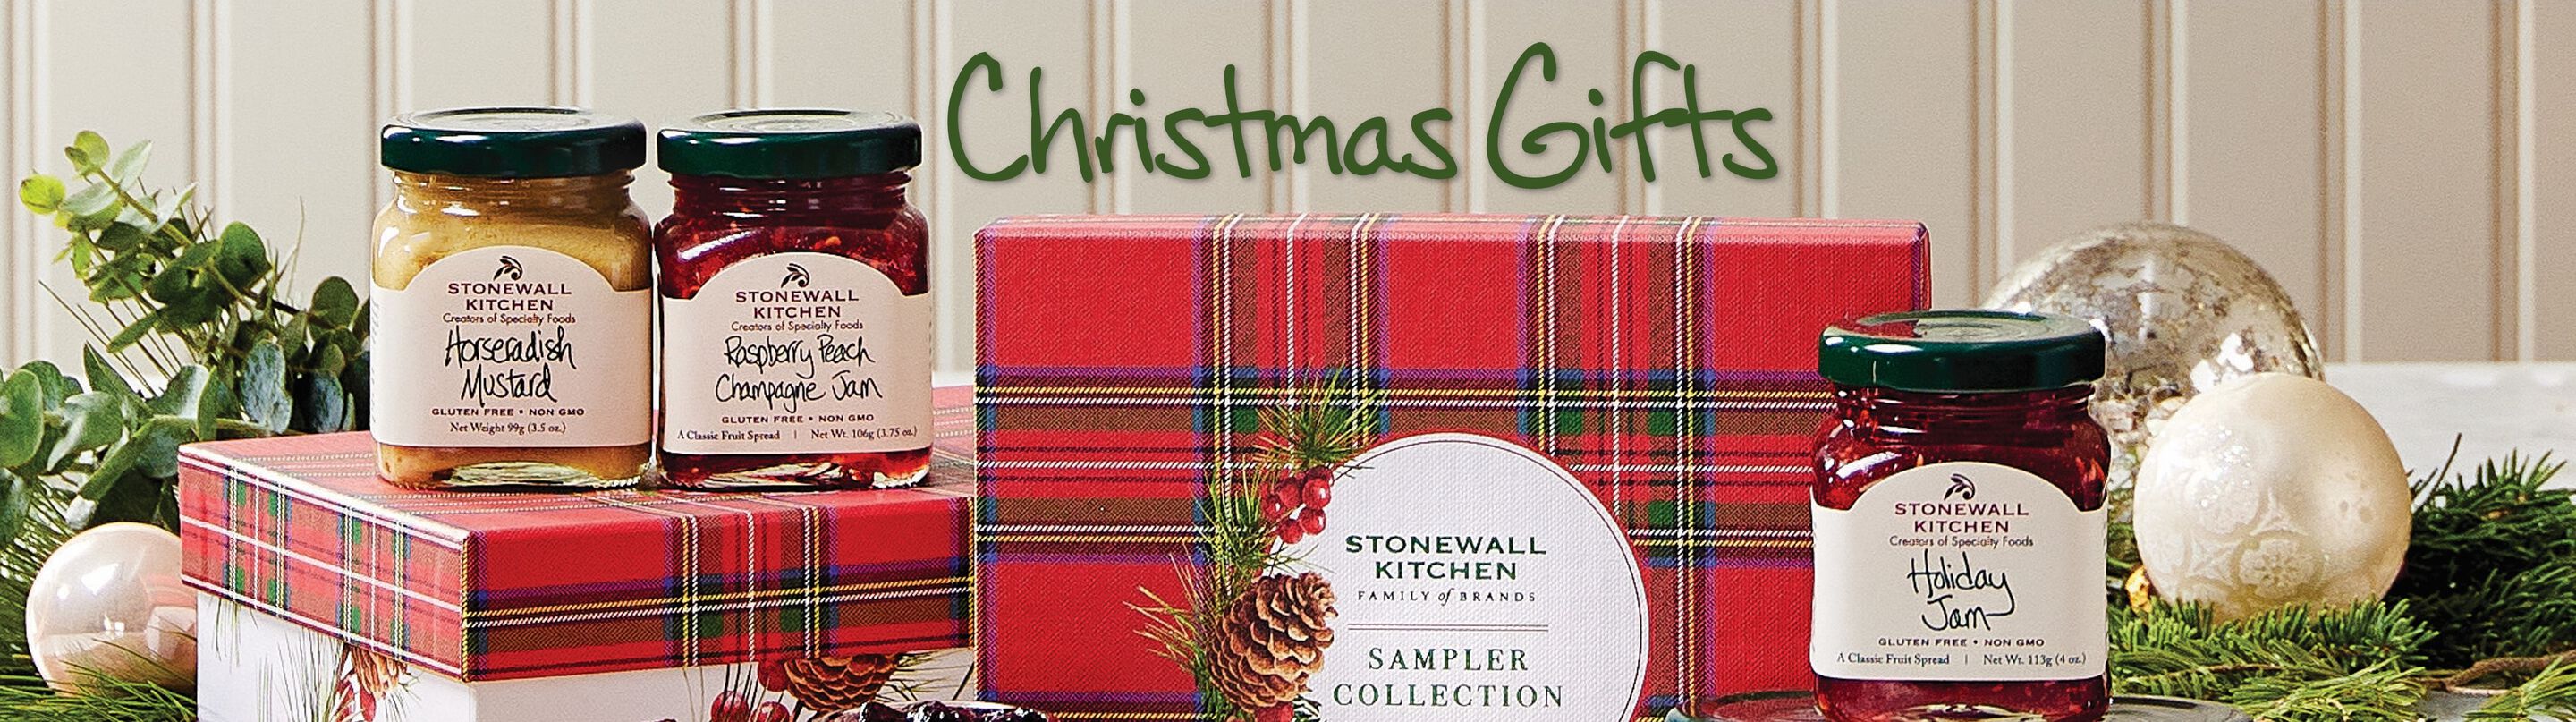 https://www.stonewallkitchen.com/dw/image/v2/BGFW_PRD/on/demandware.static/-/Library-Sites-StonewallSharedLibrary/default/dw8e599c20/landing-pages/christmas-gifts-banner3.jpg?sw=2880